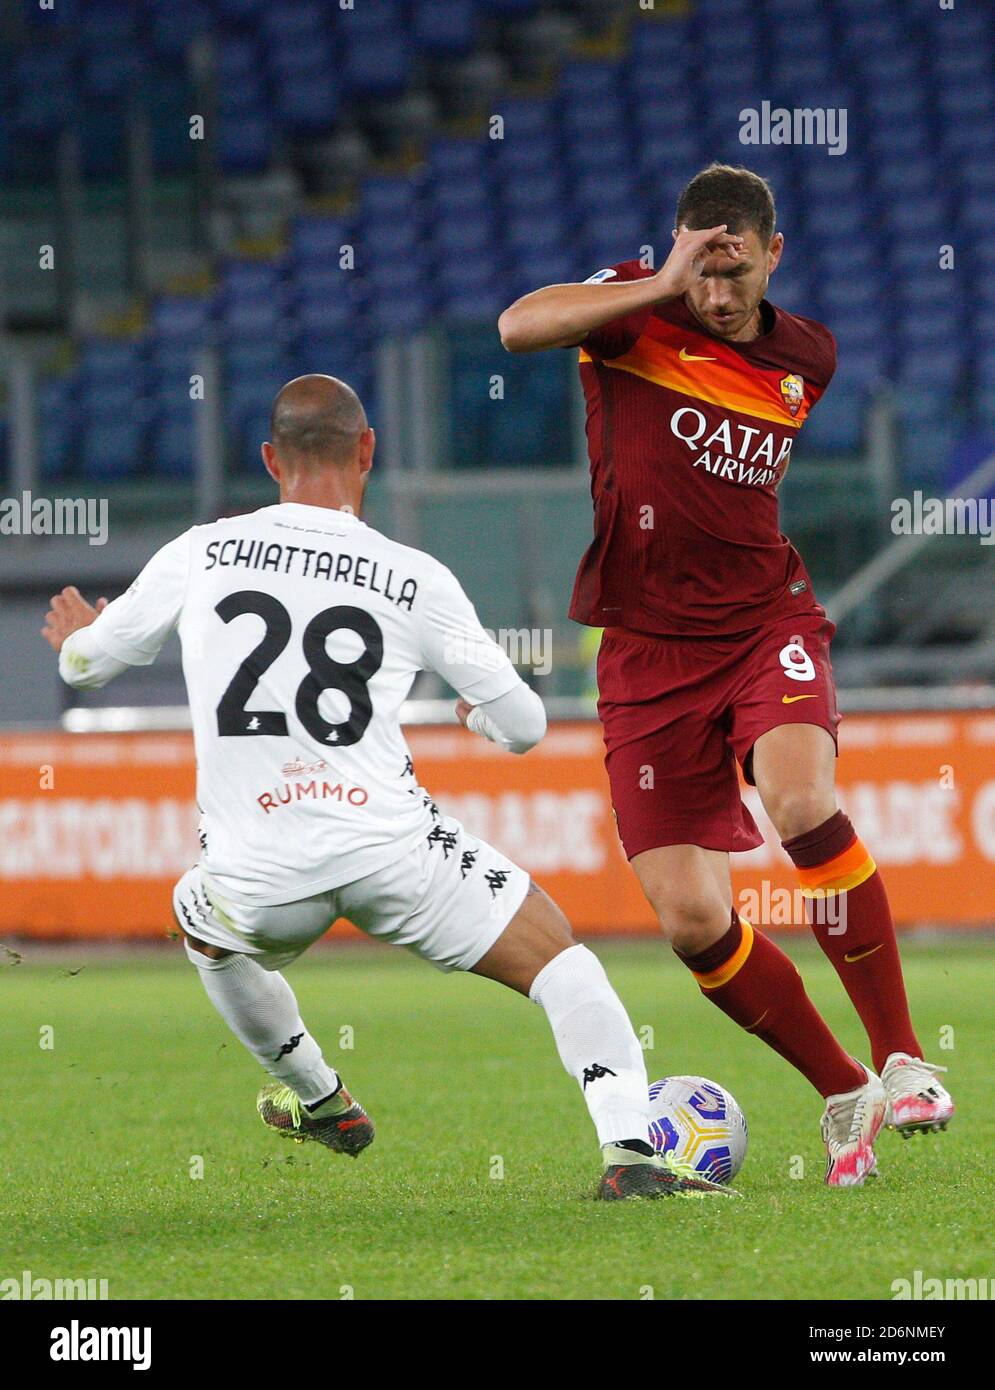 Rome, Italy. 18th Oct, 2020. Roma s Edin Dzeko, right, is challenged by Benevento s Pasquale Schiattarella during the Serie A soccer match between Roma and Benevento at the Olympic Stadium. Credit: Riccardo De Luca - Update Images/Alamy Live News Stock Photo